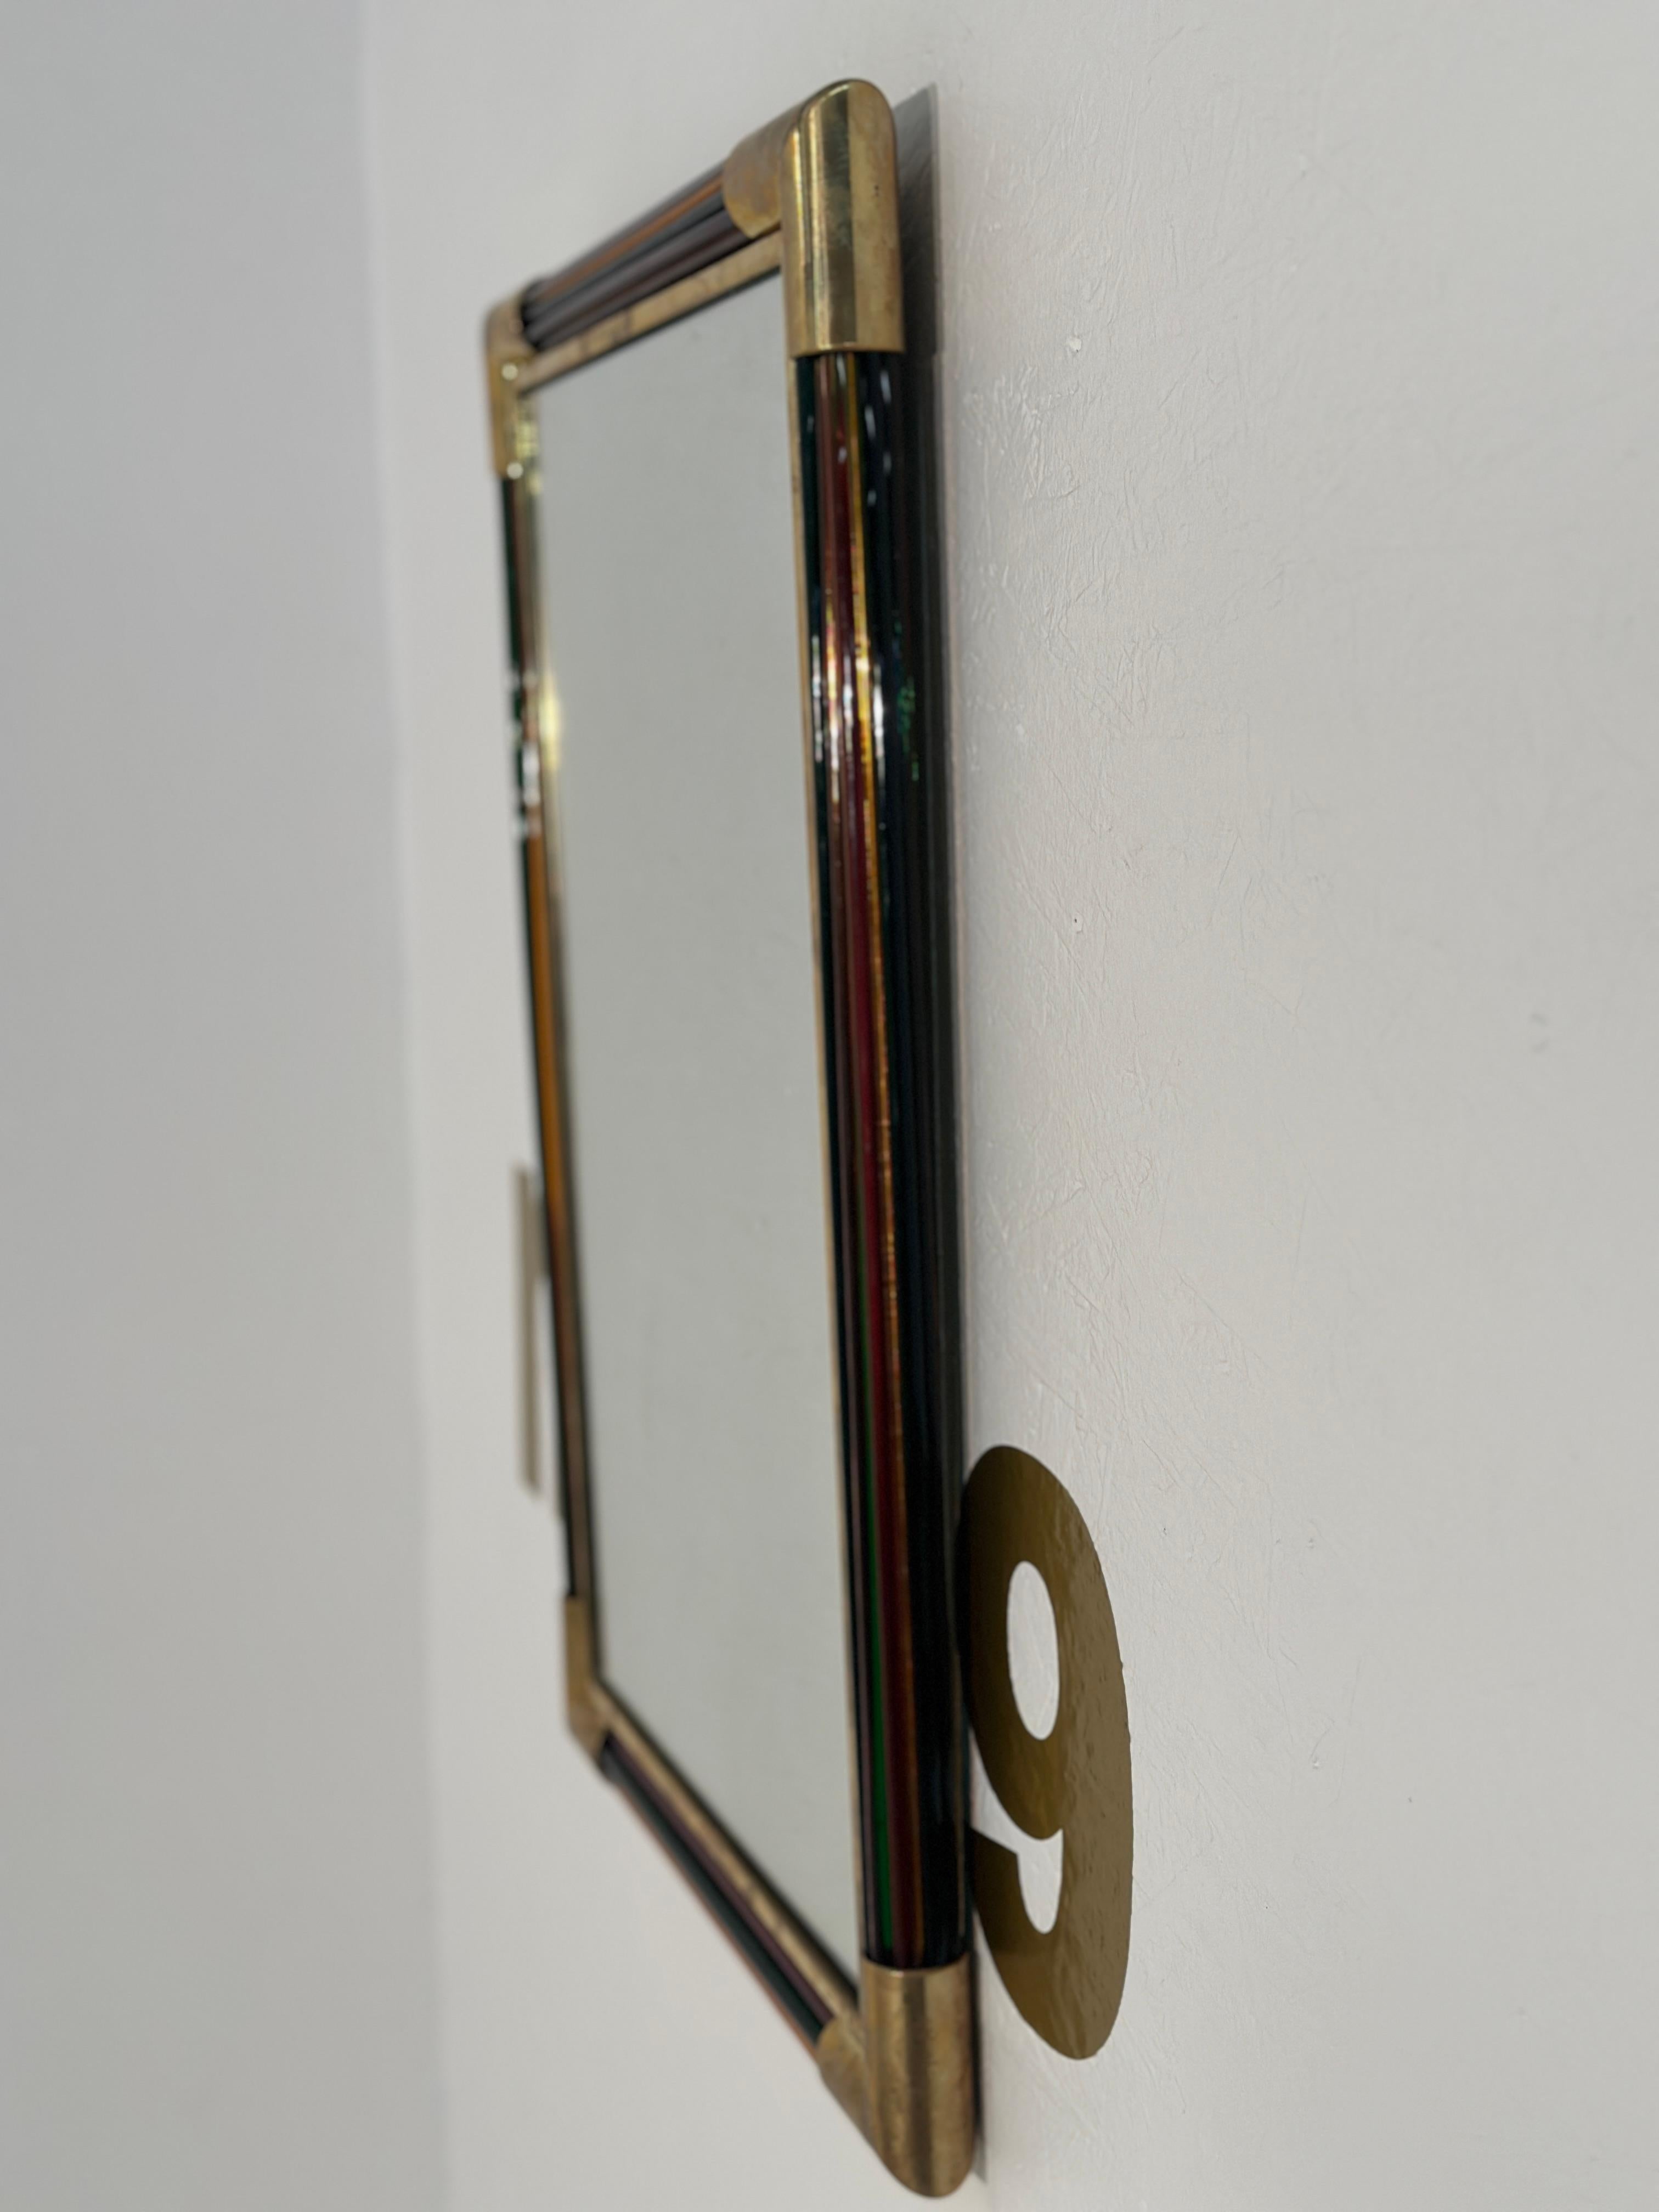 The Vintage Italian Rectangular Brass and Glass Wall Mirror from the 1980s features a distinctive design with brass corners and a round glass frame, exuding timeless elegance and Italian craftsmanship of the era.

